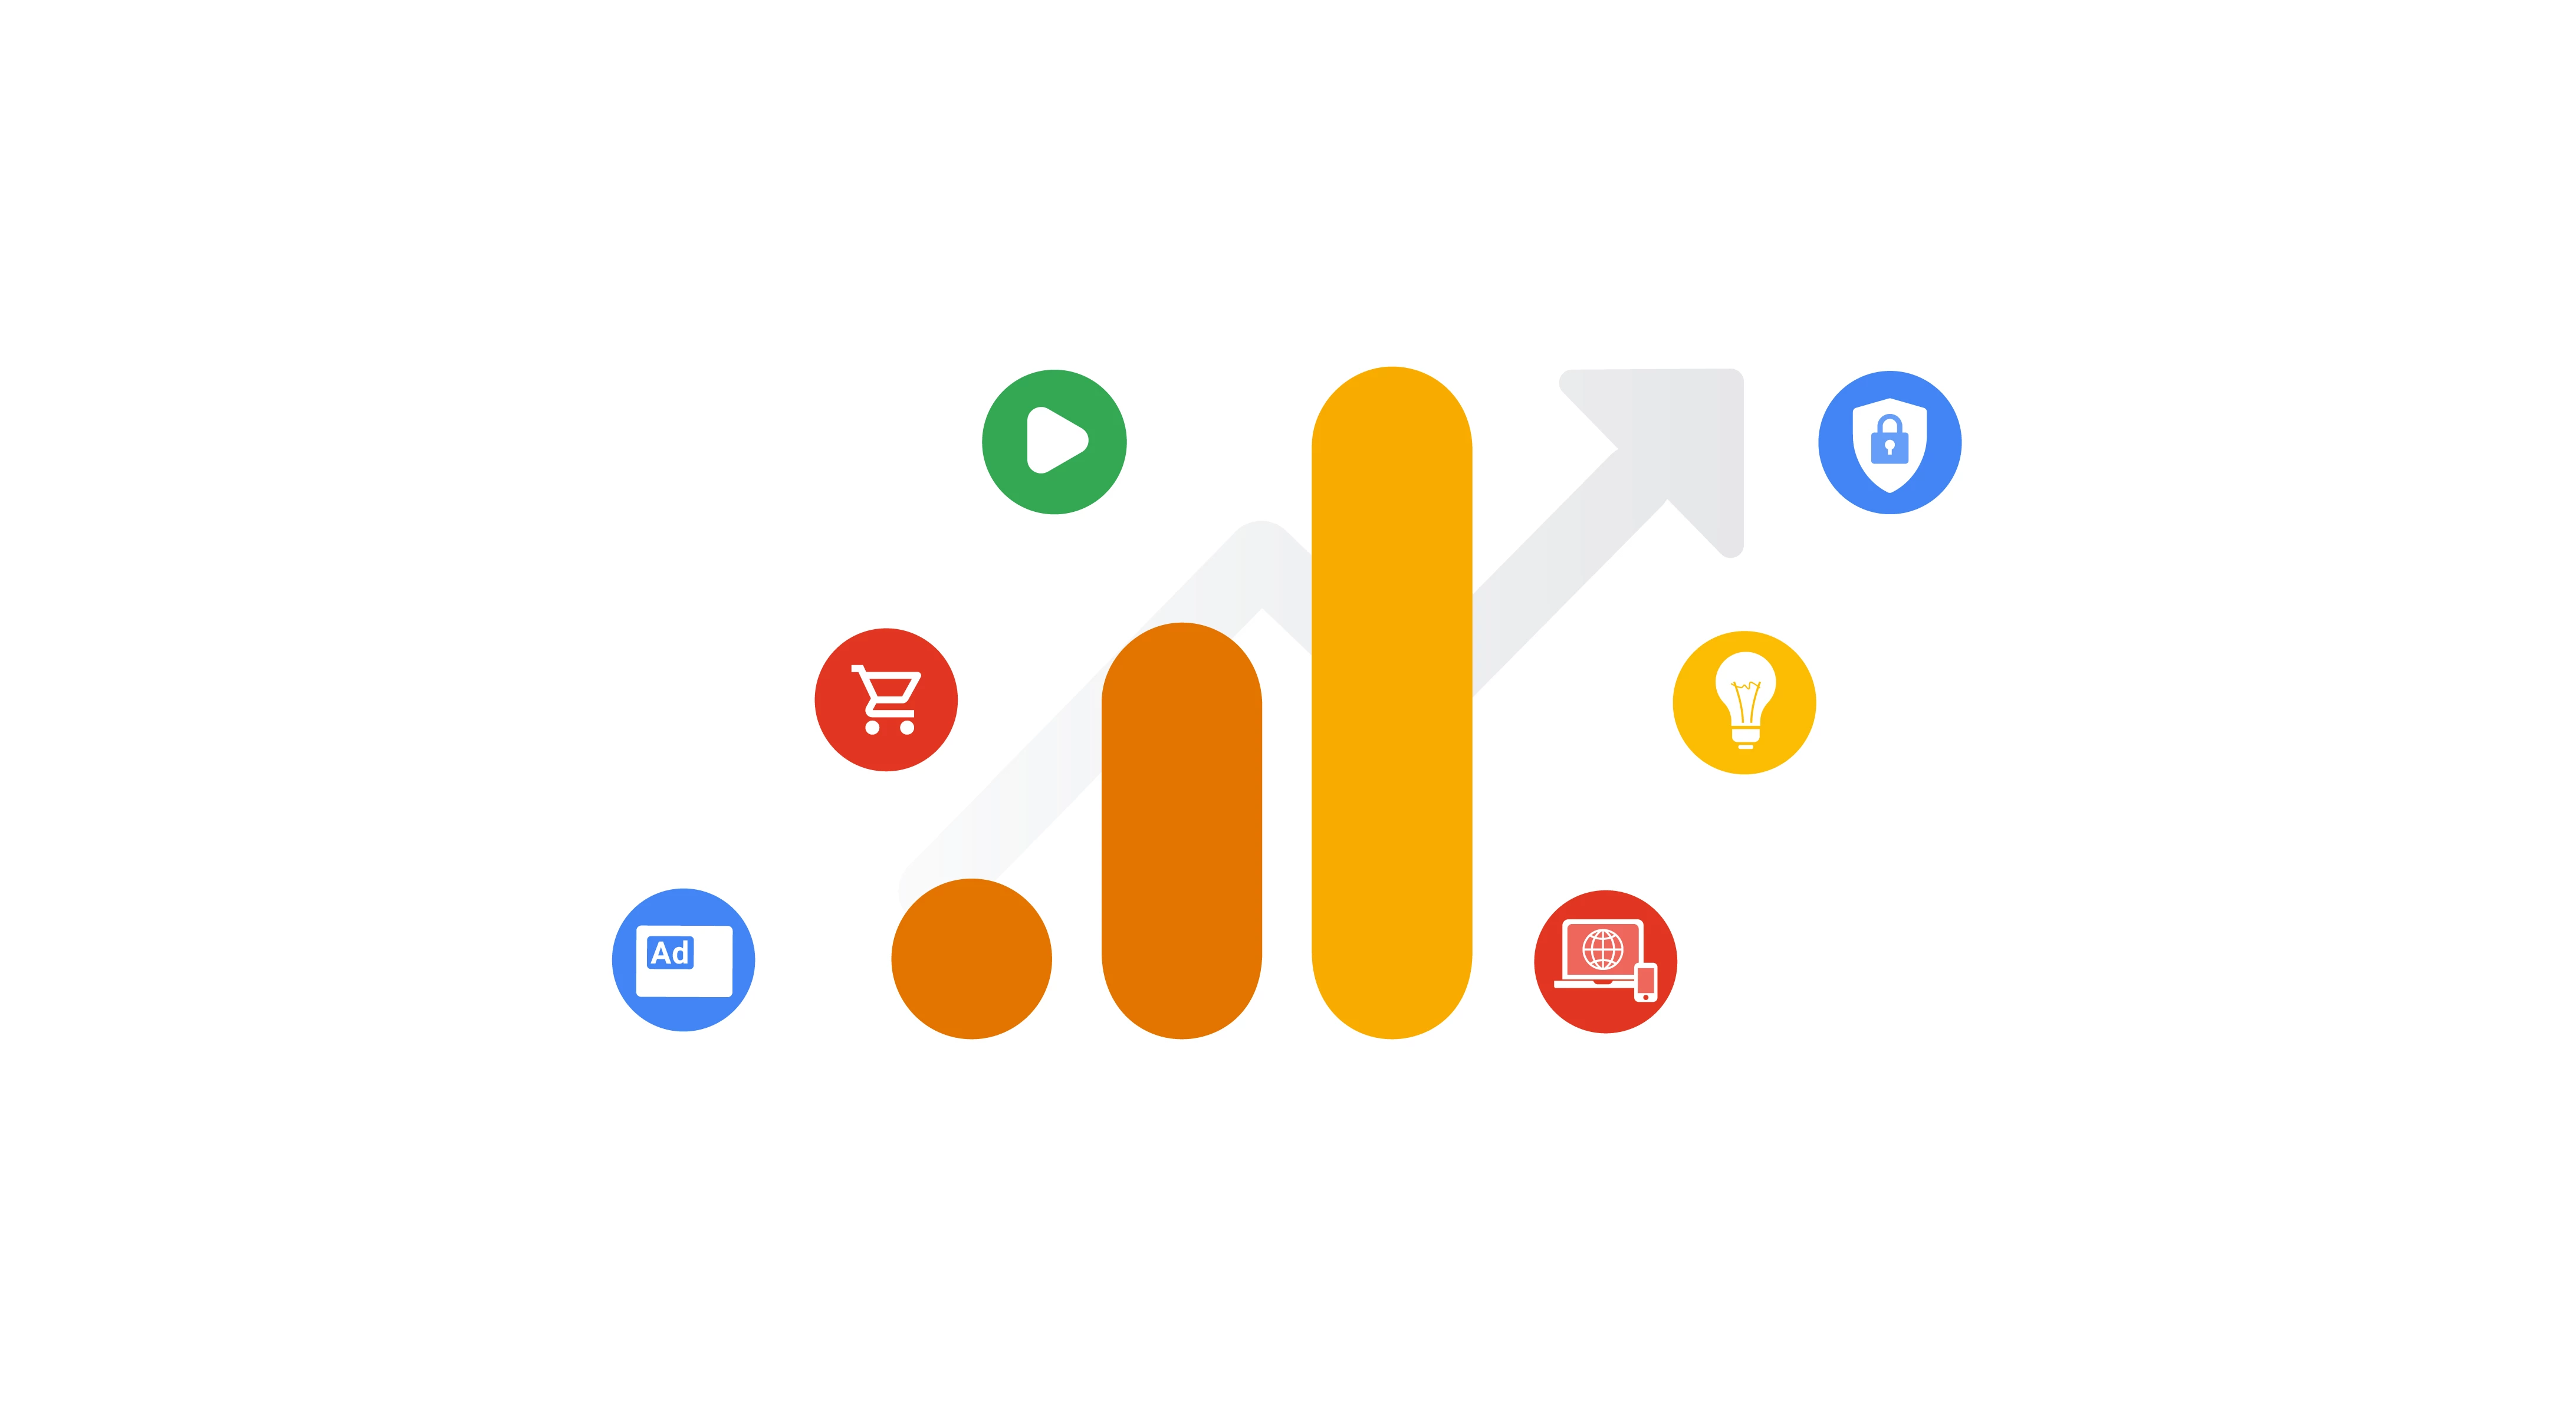 An abstract graphic showing various colored icons against a grey arrow trending upward.